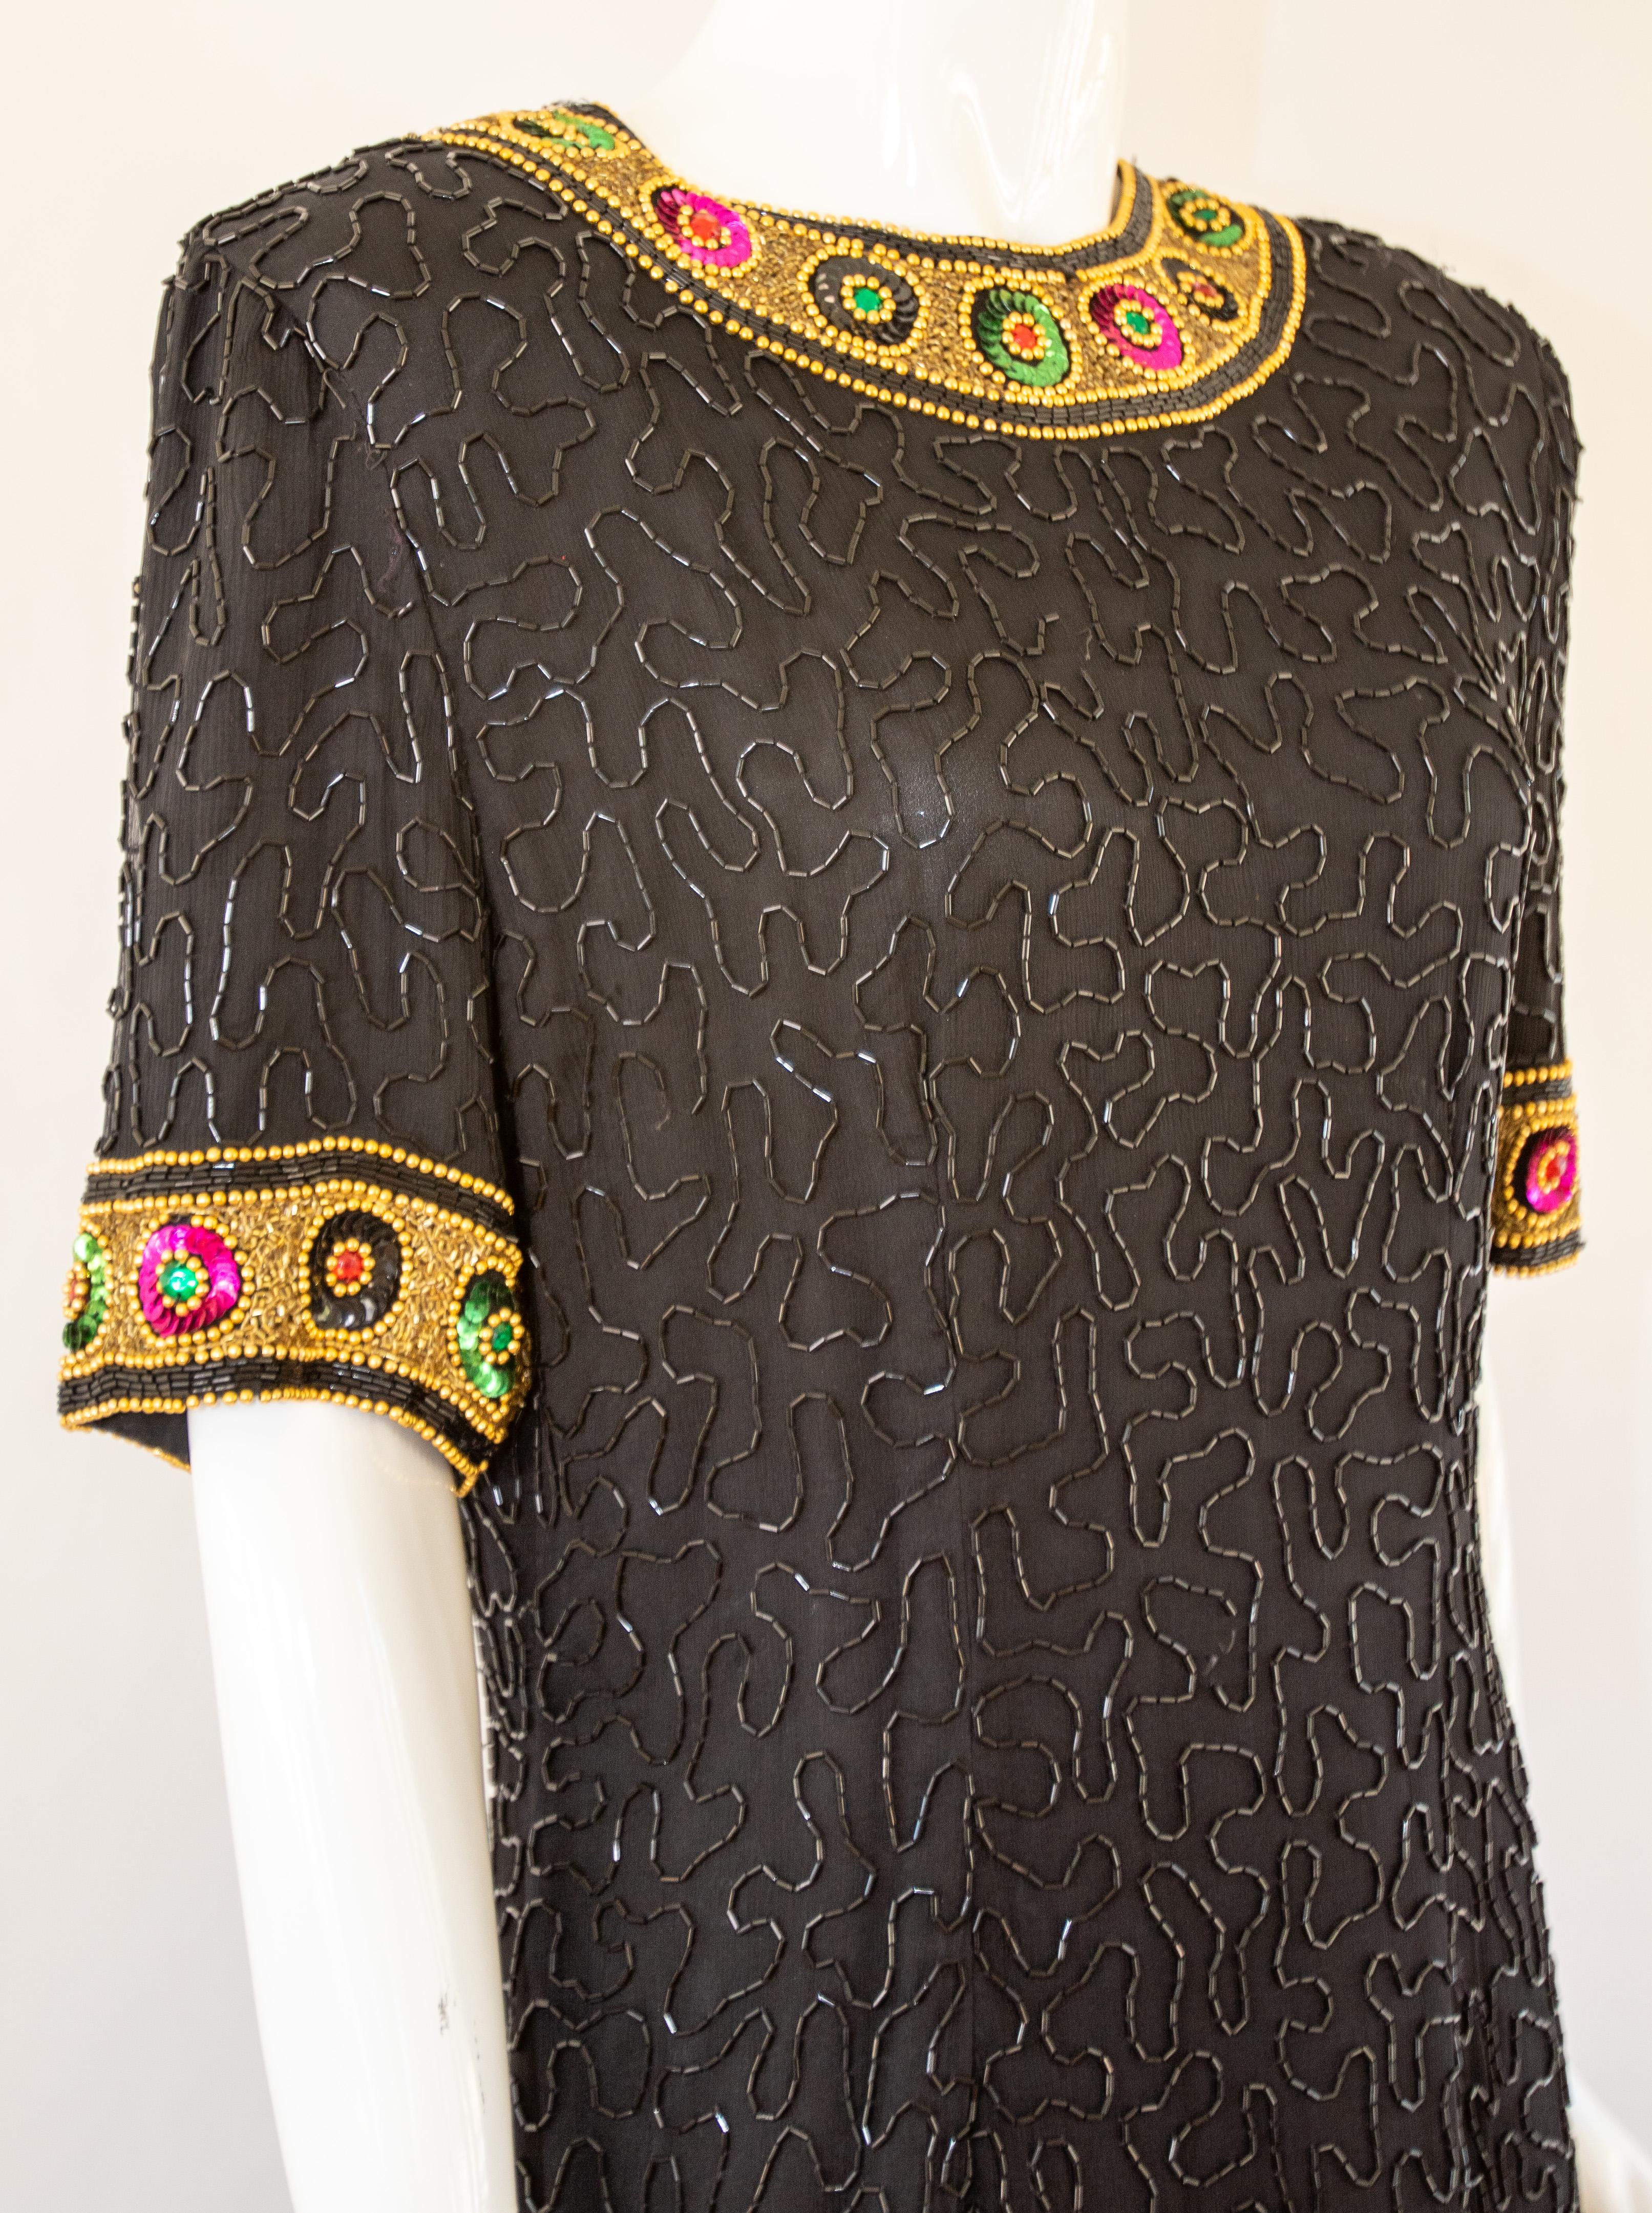 Vintage Art Deco Style Beaded Mini Dress Black and Gold In Good Condition For Sale In North Hollywood, CA